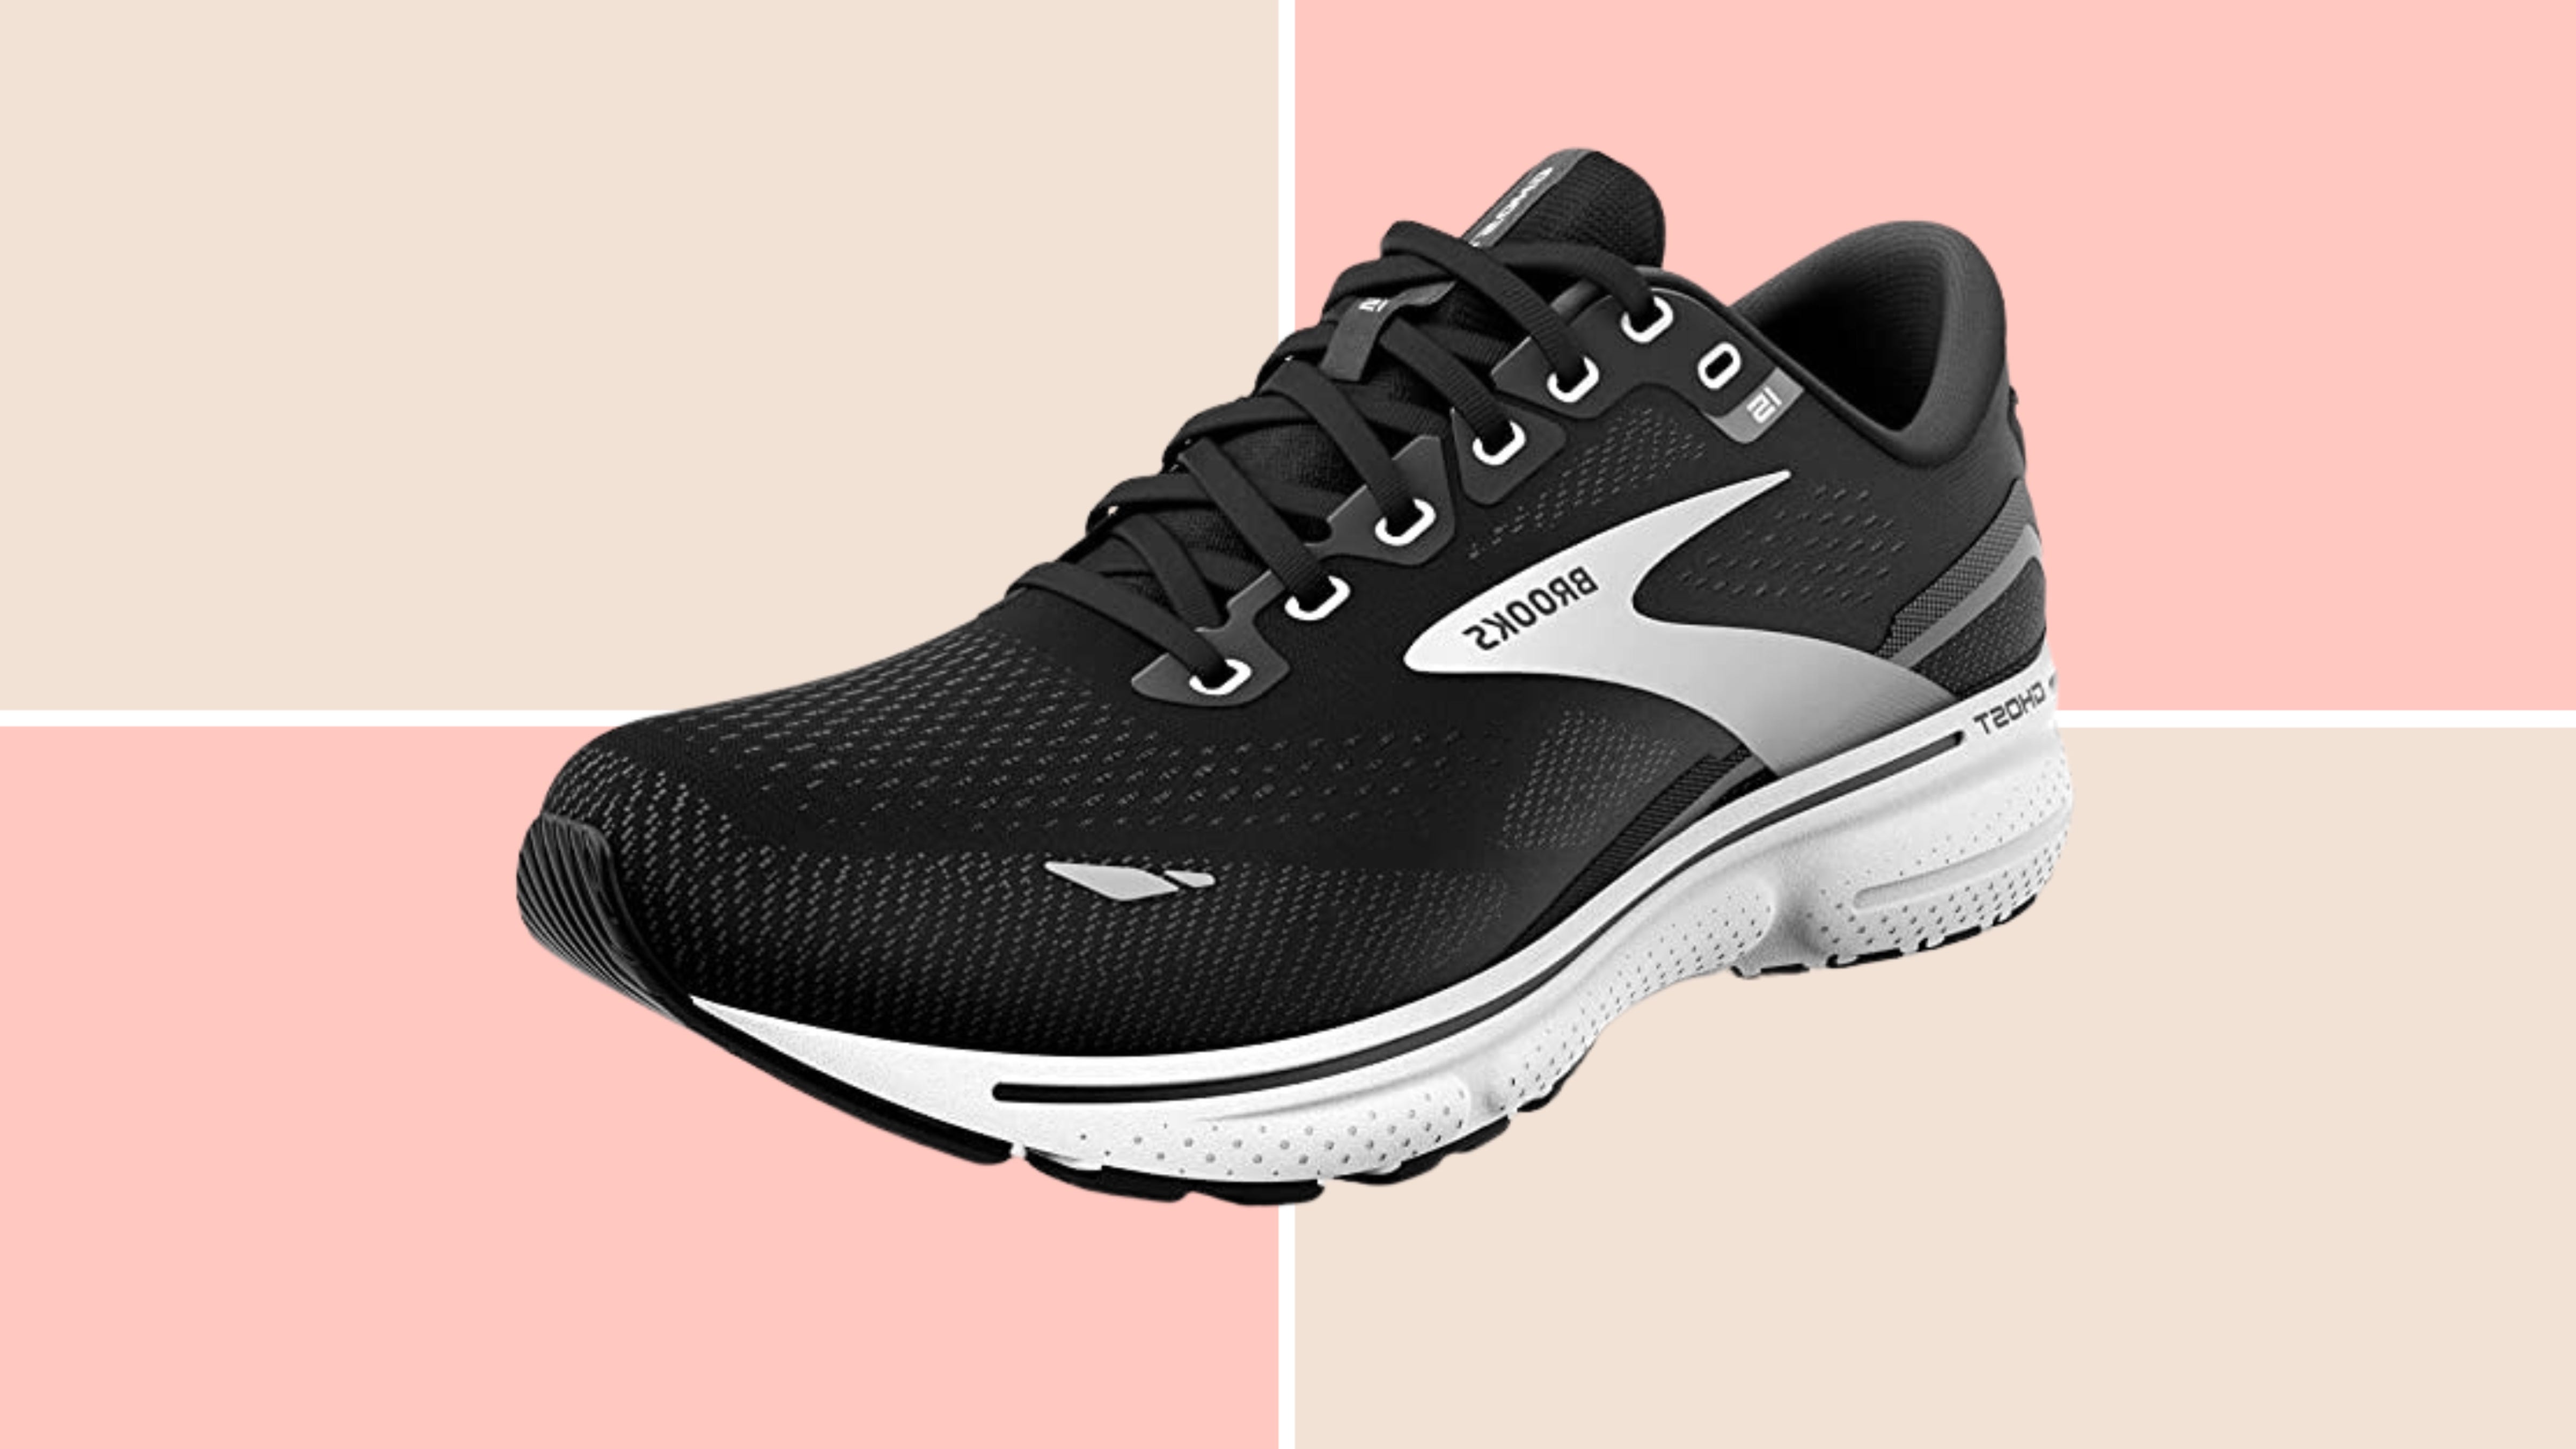 Brooks Ghost 15 shoes: Shop these quality kicks at Amazon today